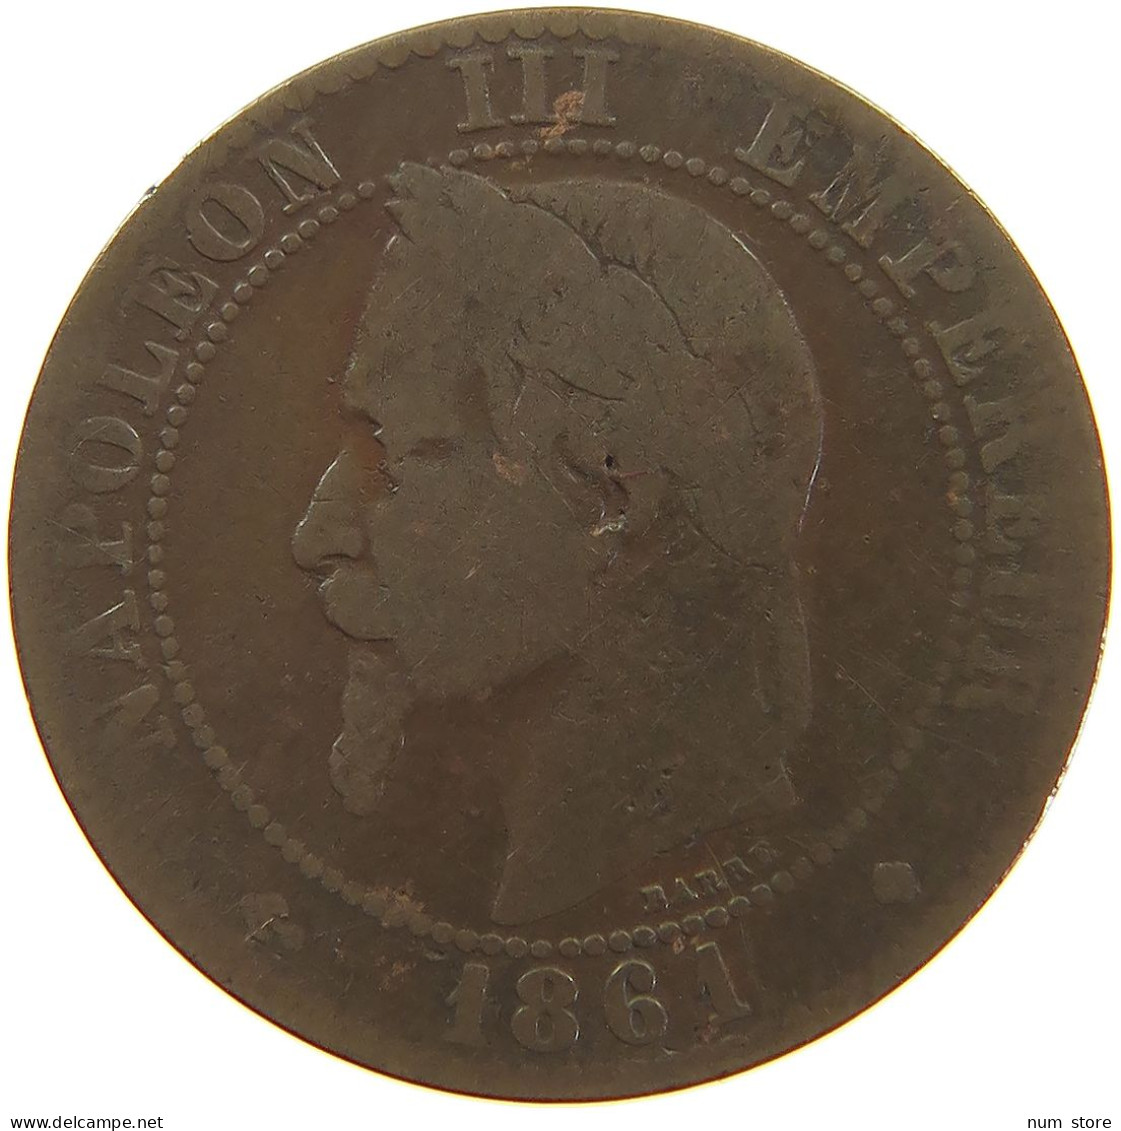 FRANCE 2 CENTIMES 1861 BB #a059 0153 - 2 Centimes